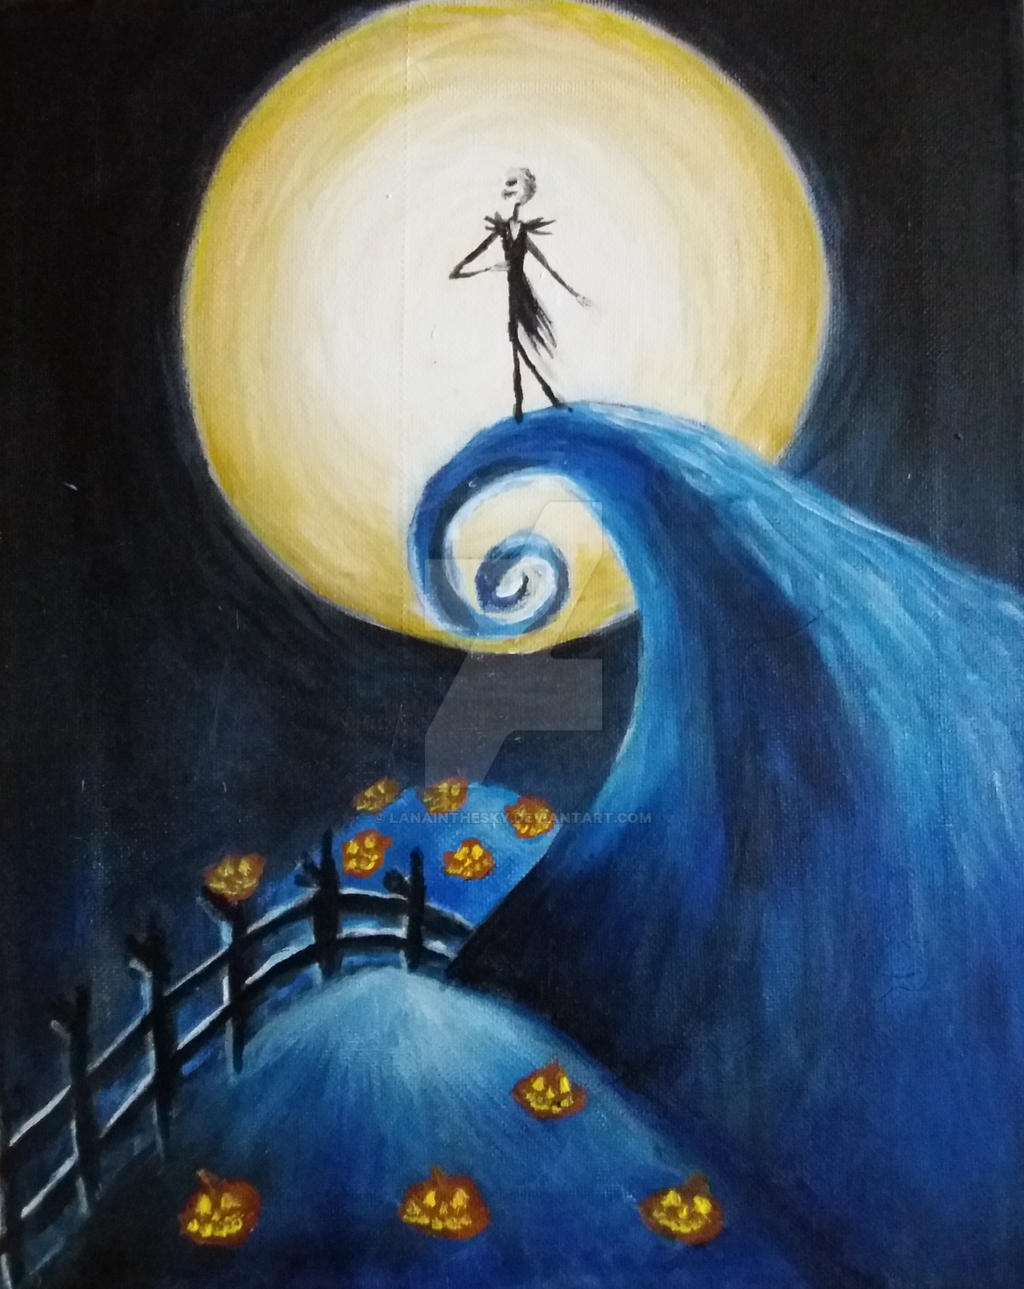 The Nightmare Before Christmas by LanaInTheSky on DeviantArt